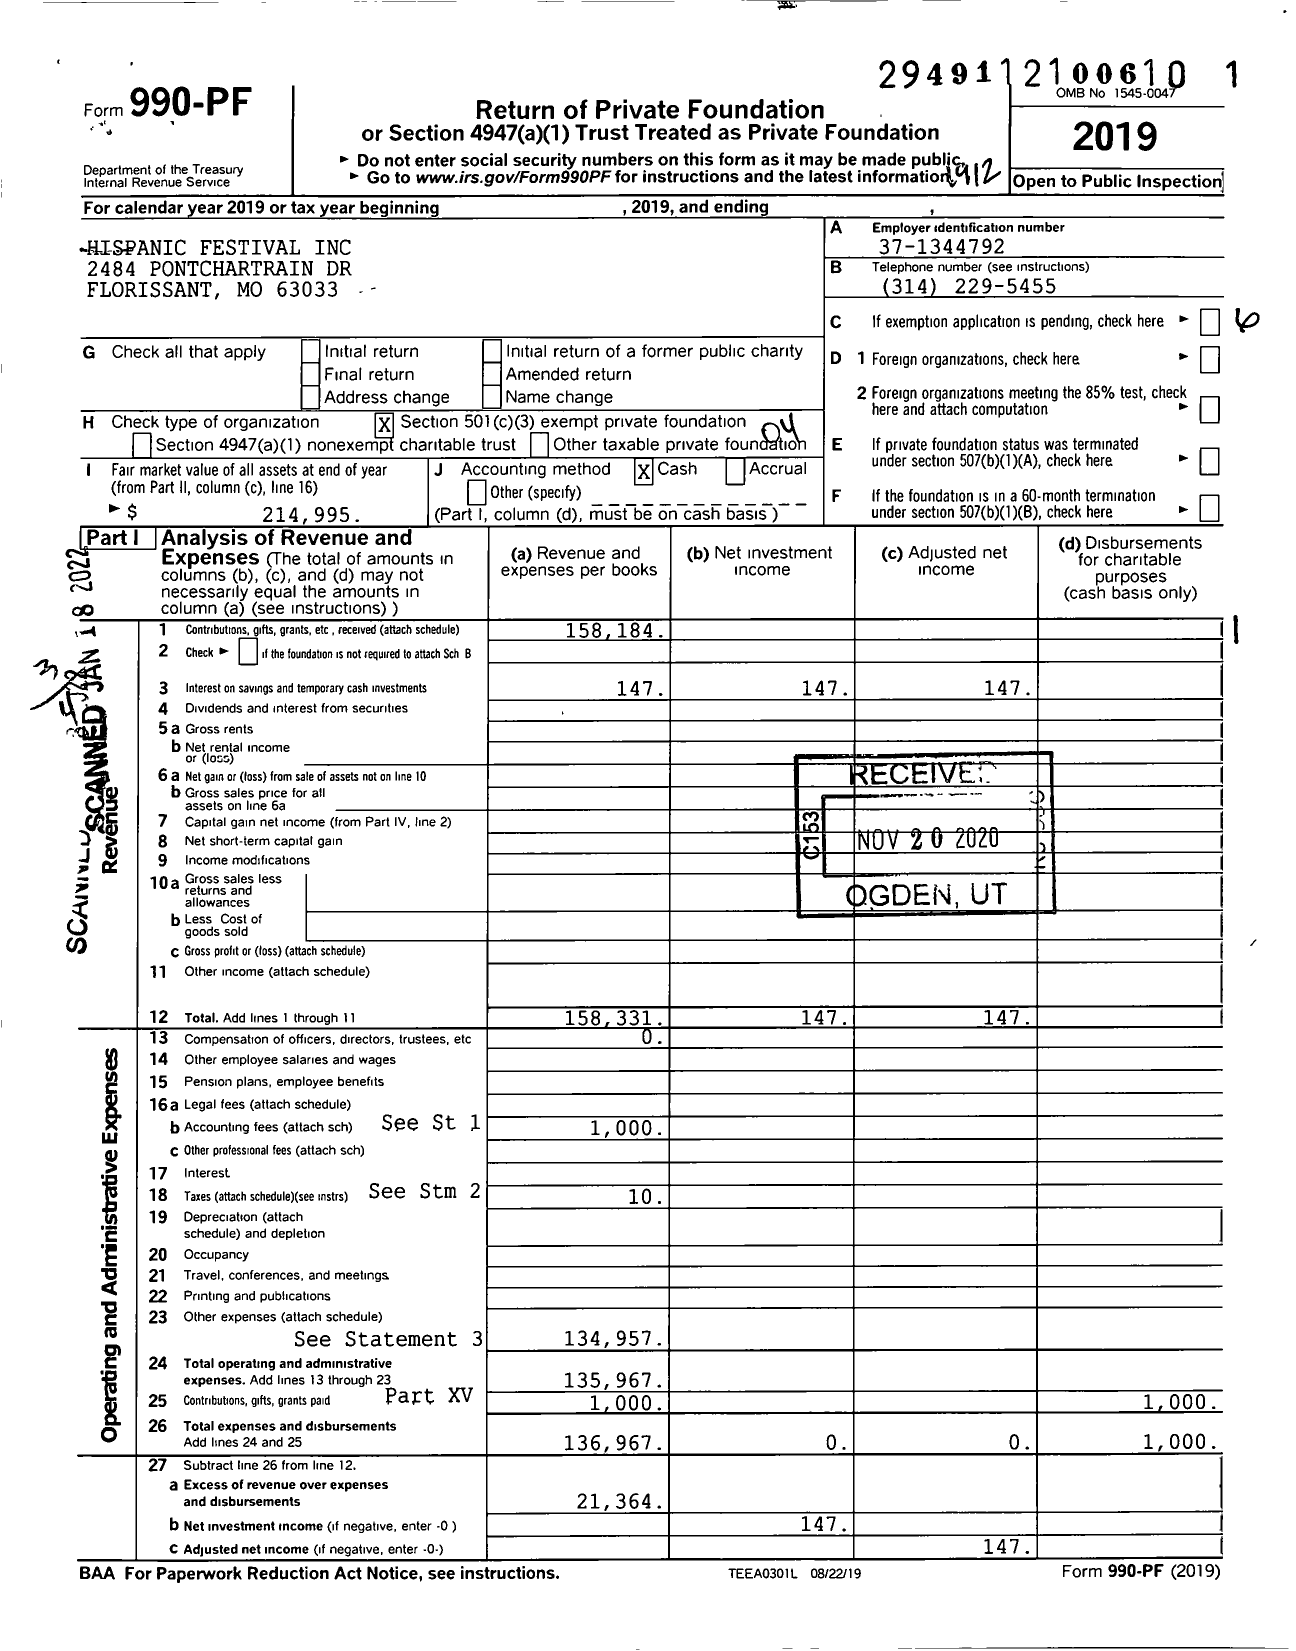 Image of first page of 2019 Form 990PF for Hispanic Festival